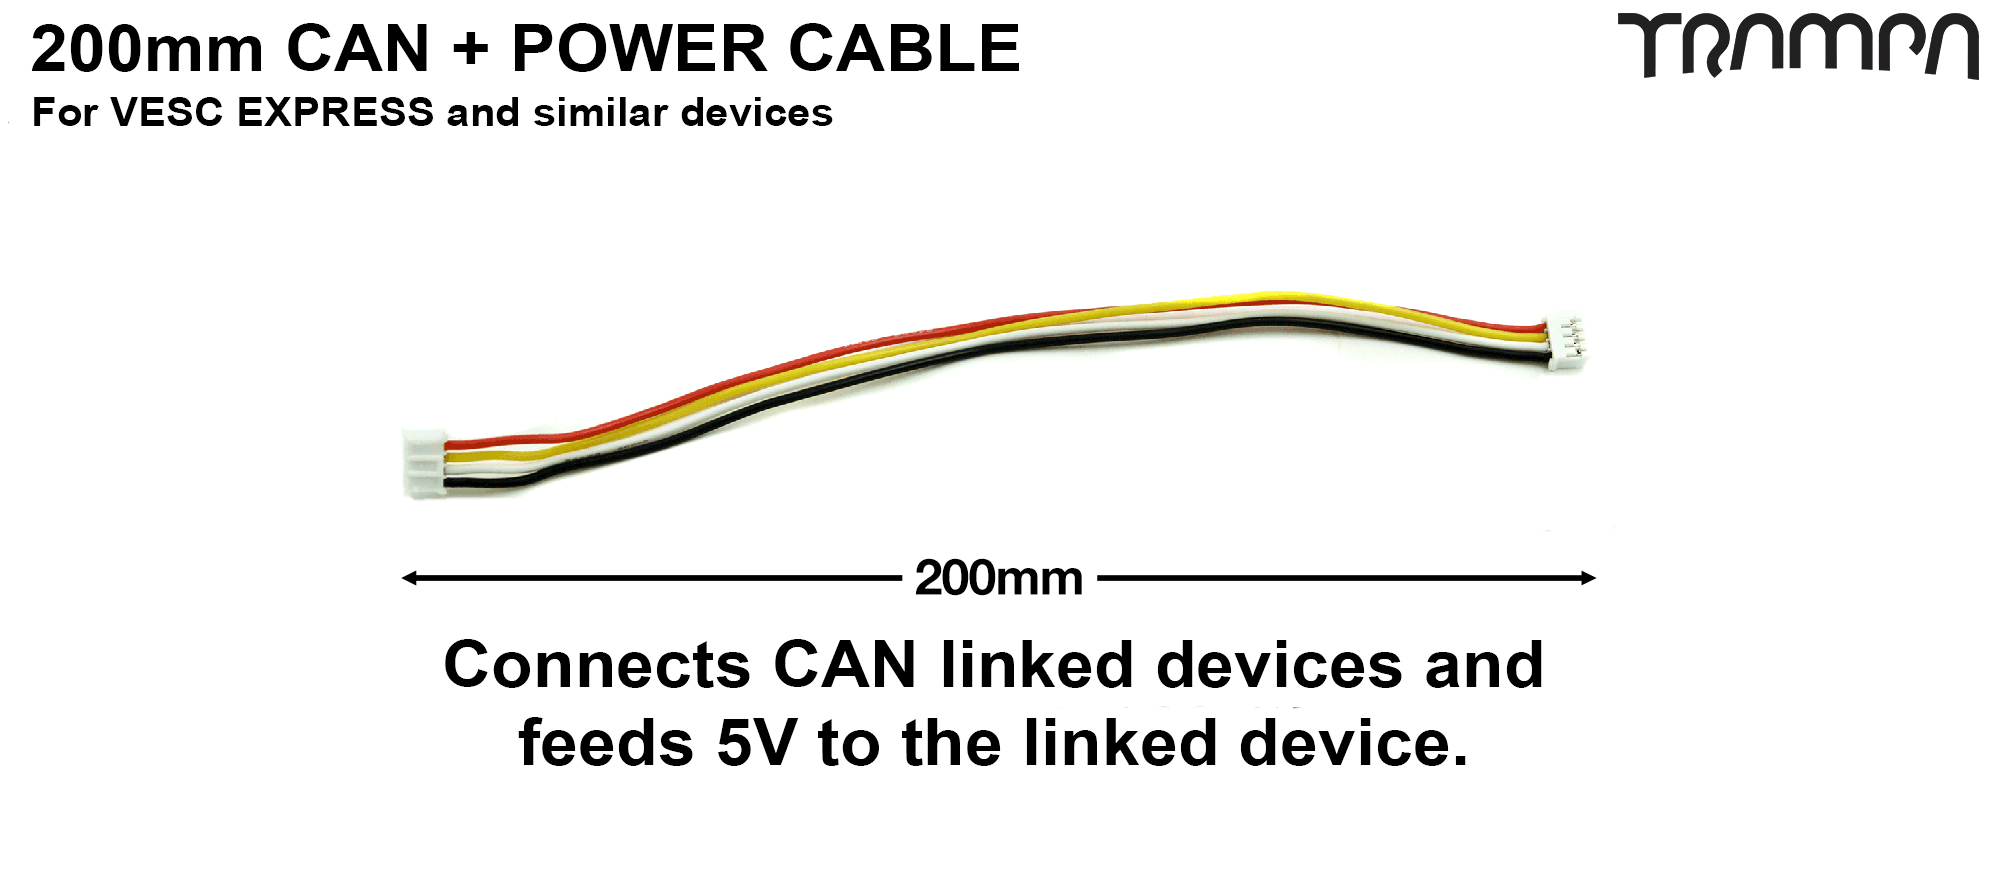 CANBUS with POWER Cable 24 AWG Silicon Black/Yellow/White/Red VESC EXPRESS - 200mm  